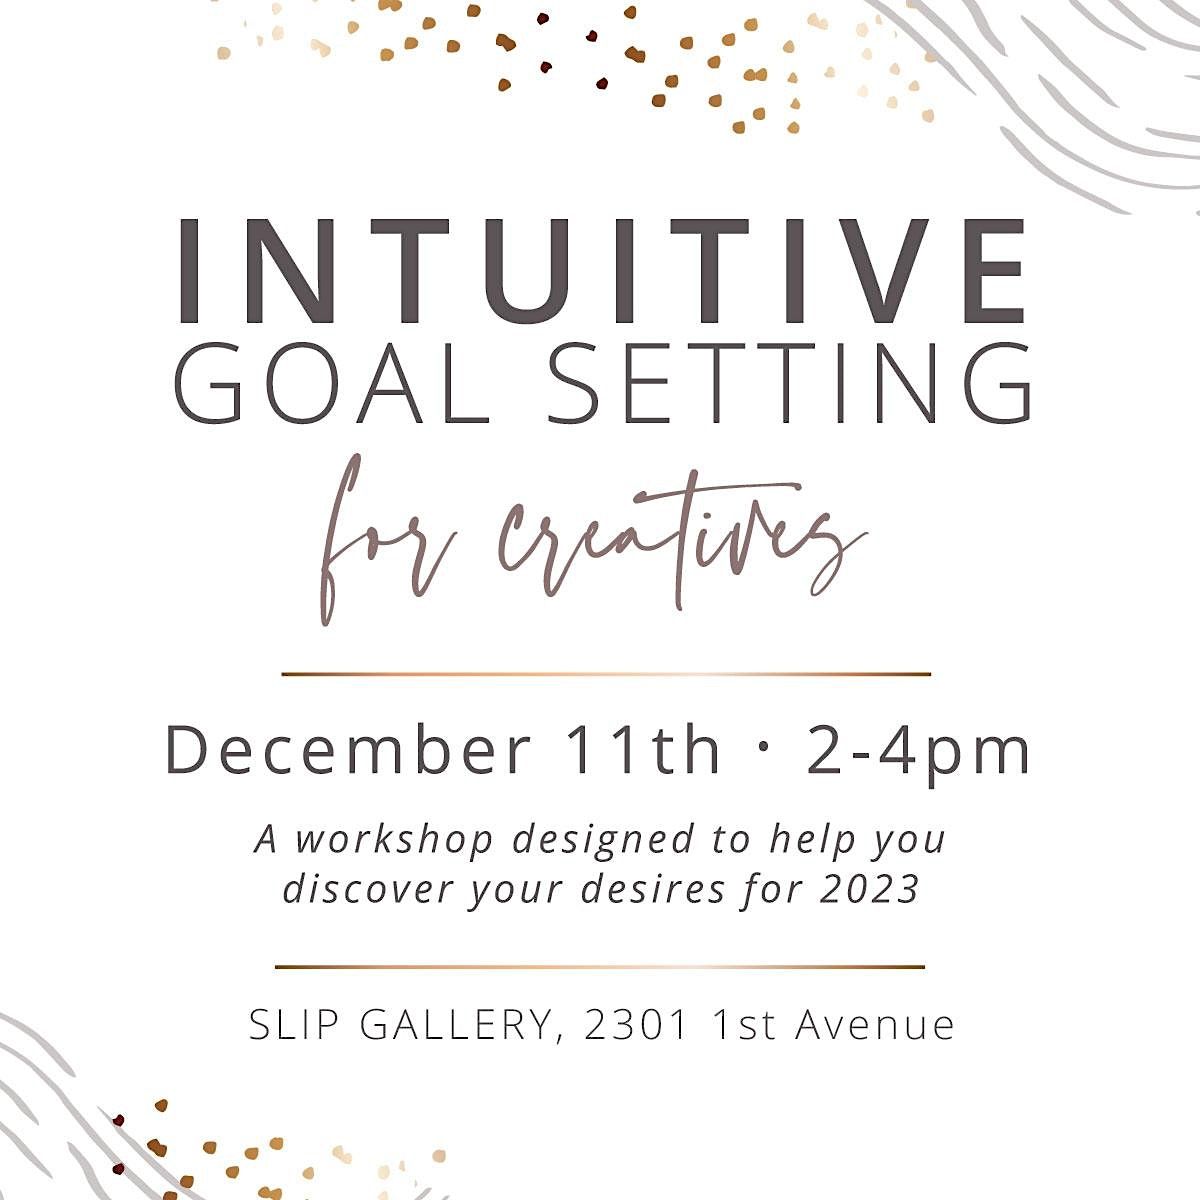 Intuitive Goal Setting for Creatives